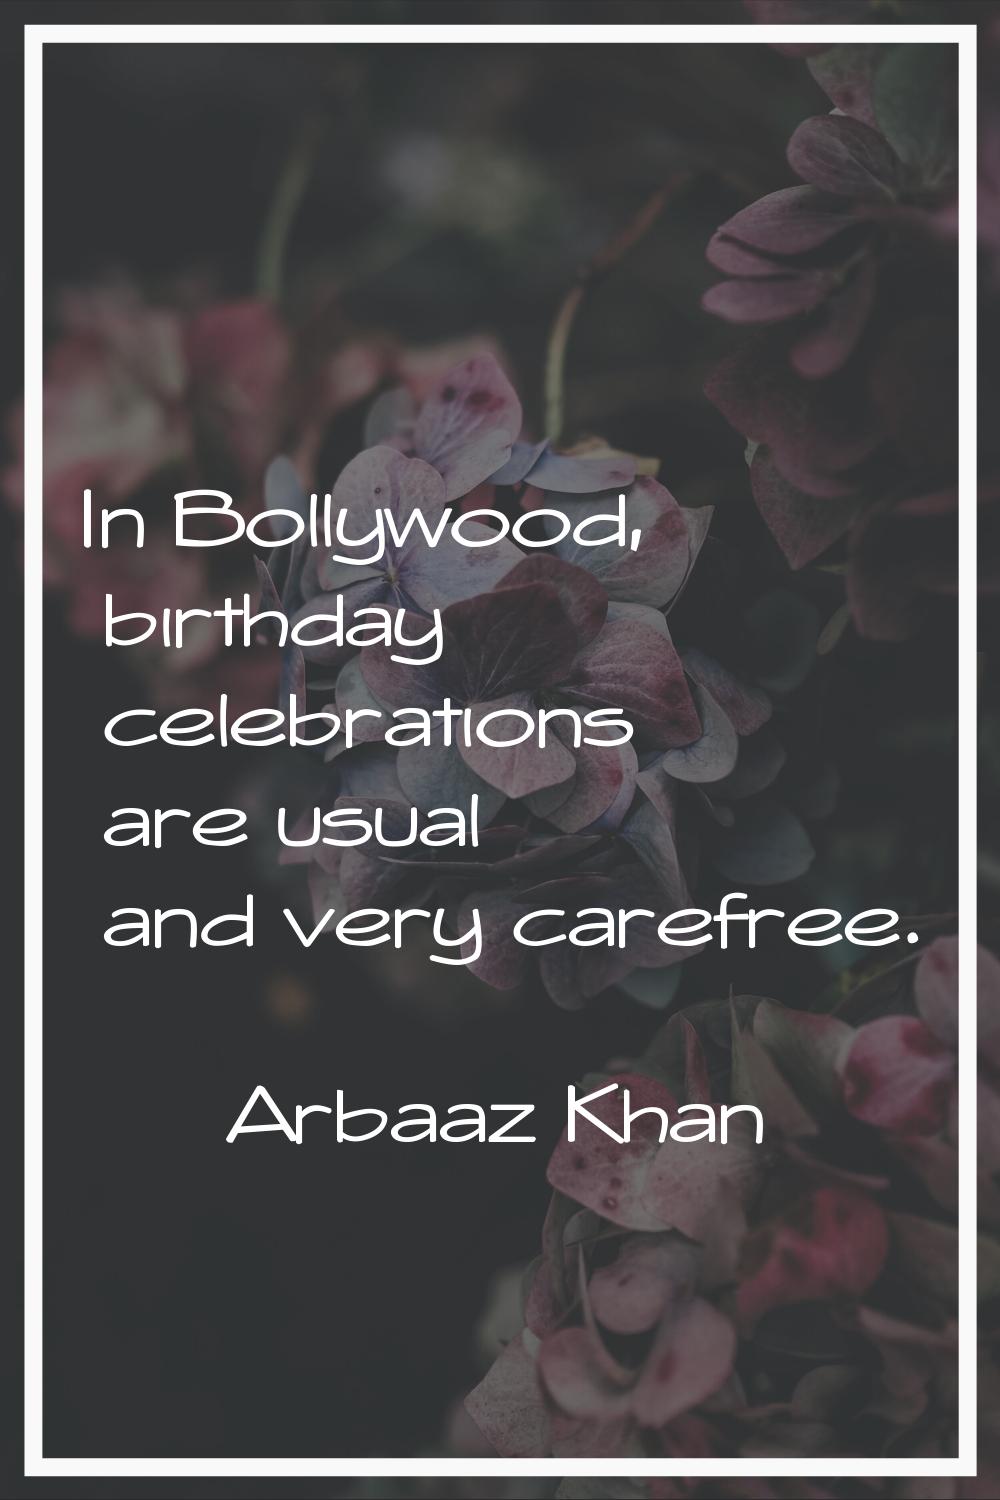 In Bollywood, birthday celebrations are usual and very carefree.